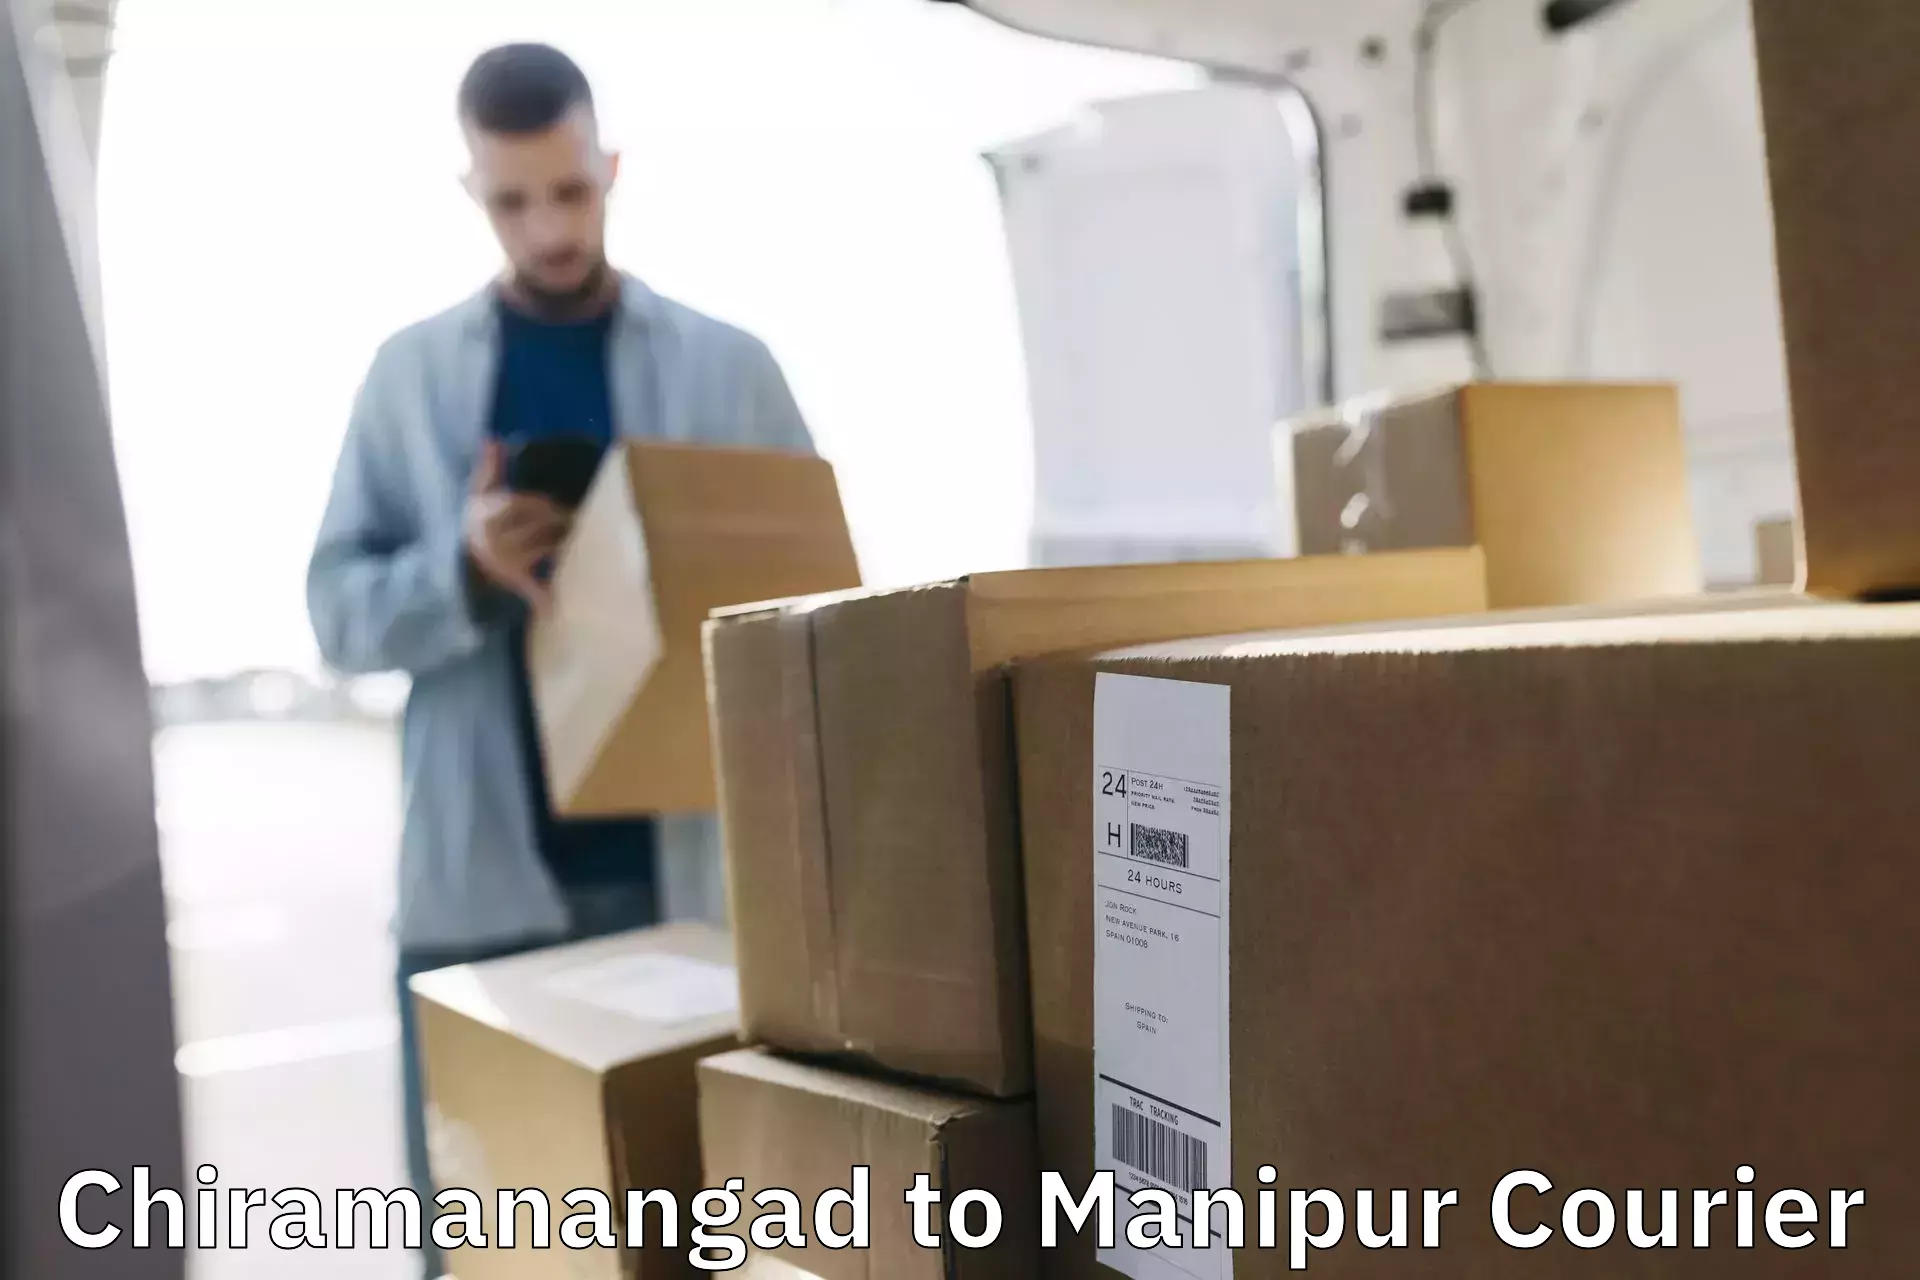 Reliable shipping solutions Chiramanangad to Manipur